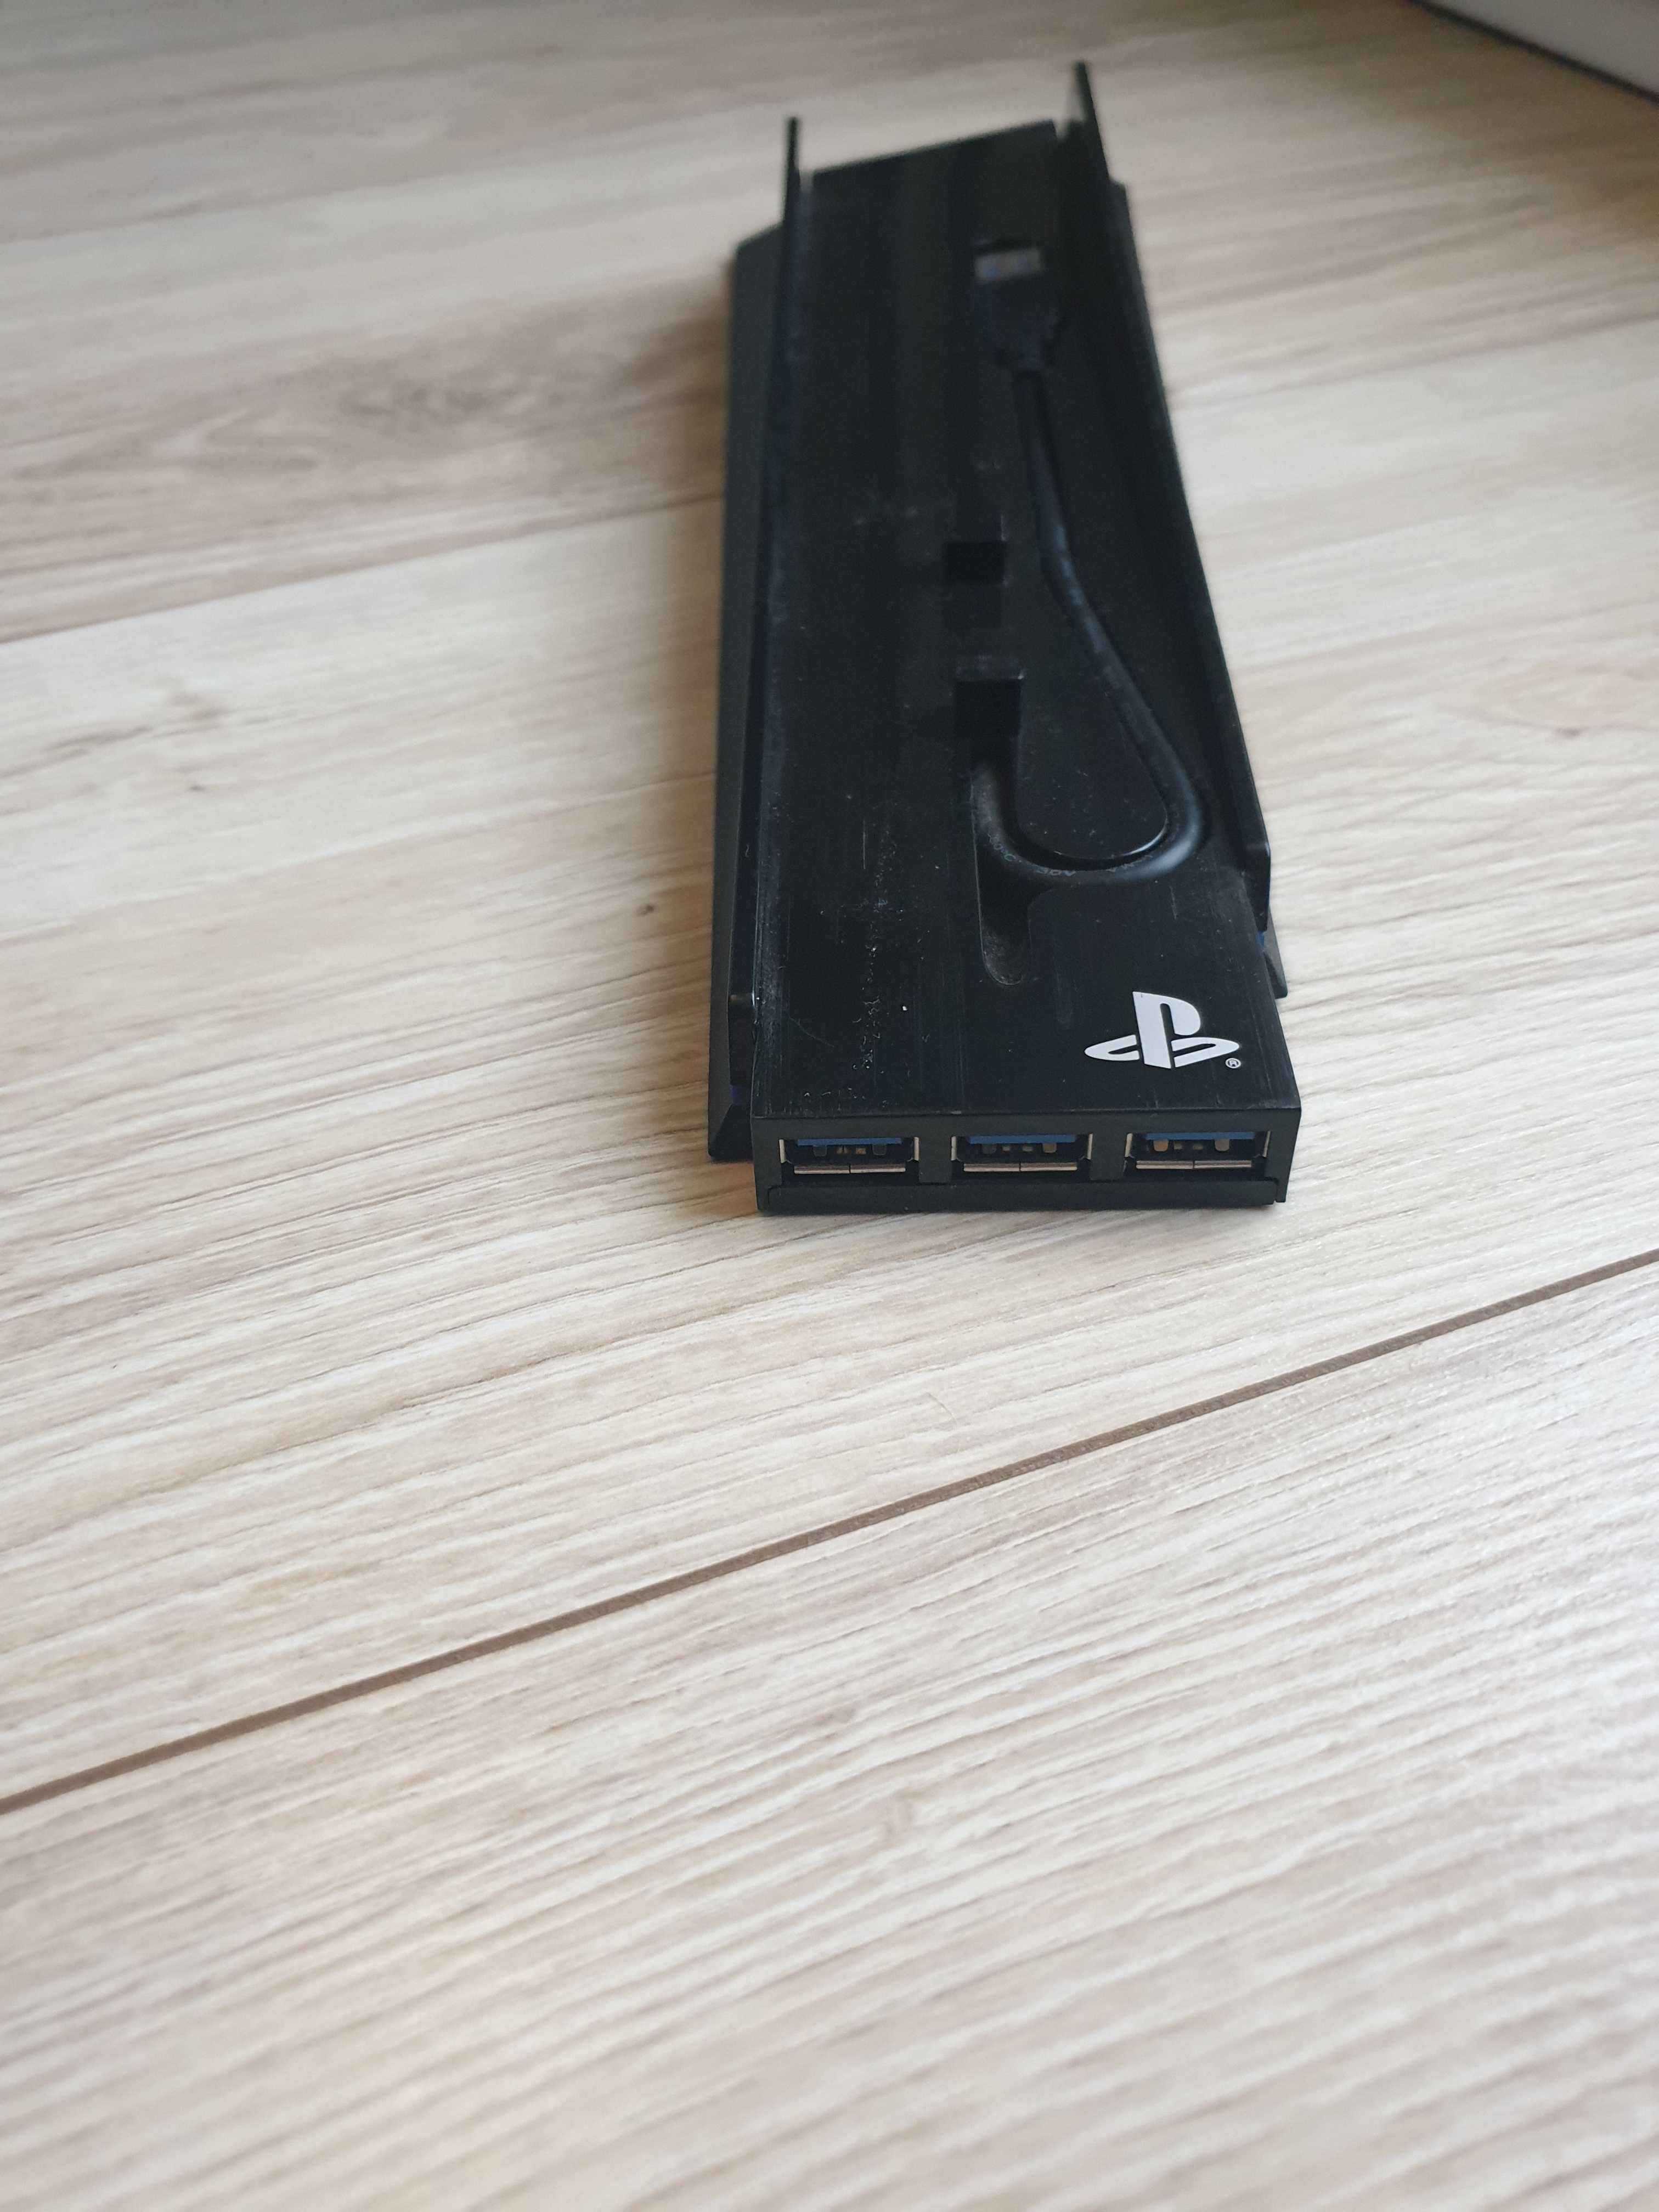 4Gamers Koncentrator Vertical Stand 'n' USB do PS4 4G-4181